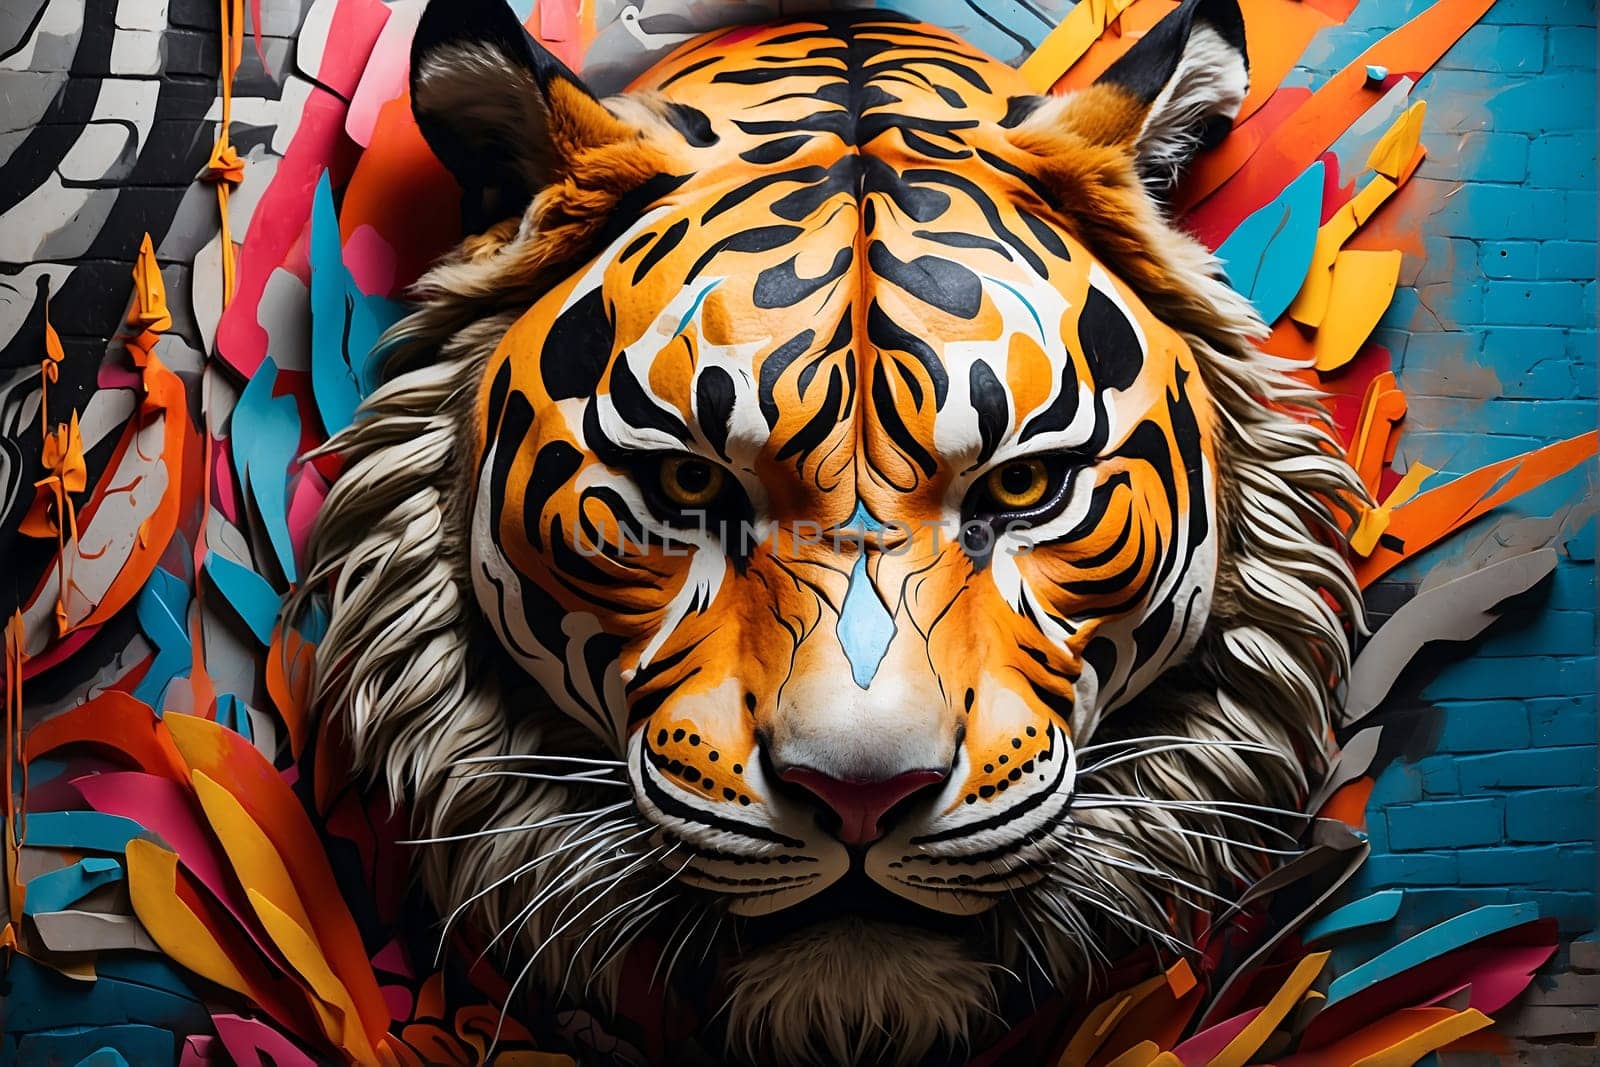 A vibrant painting of a tiger displayed on a brick wall.